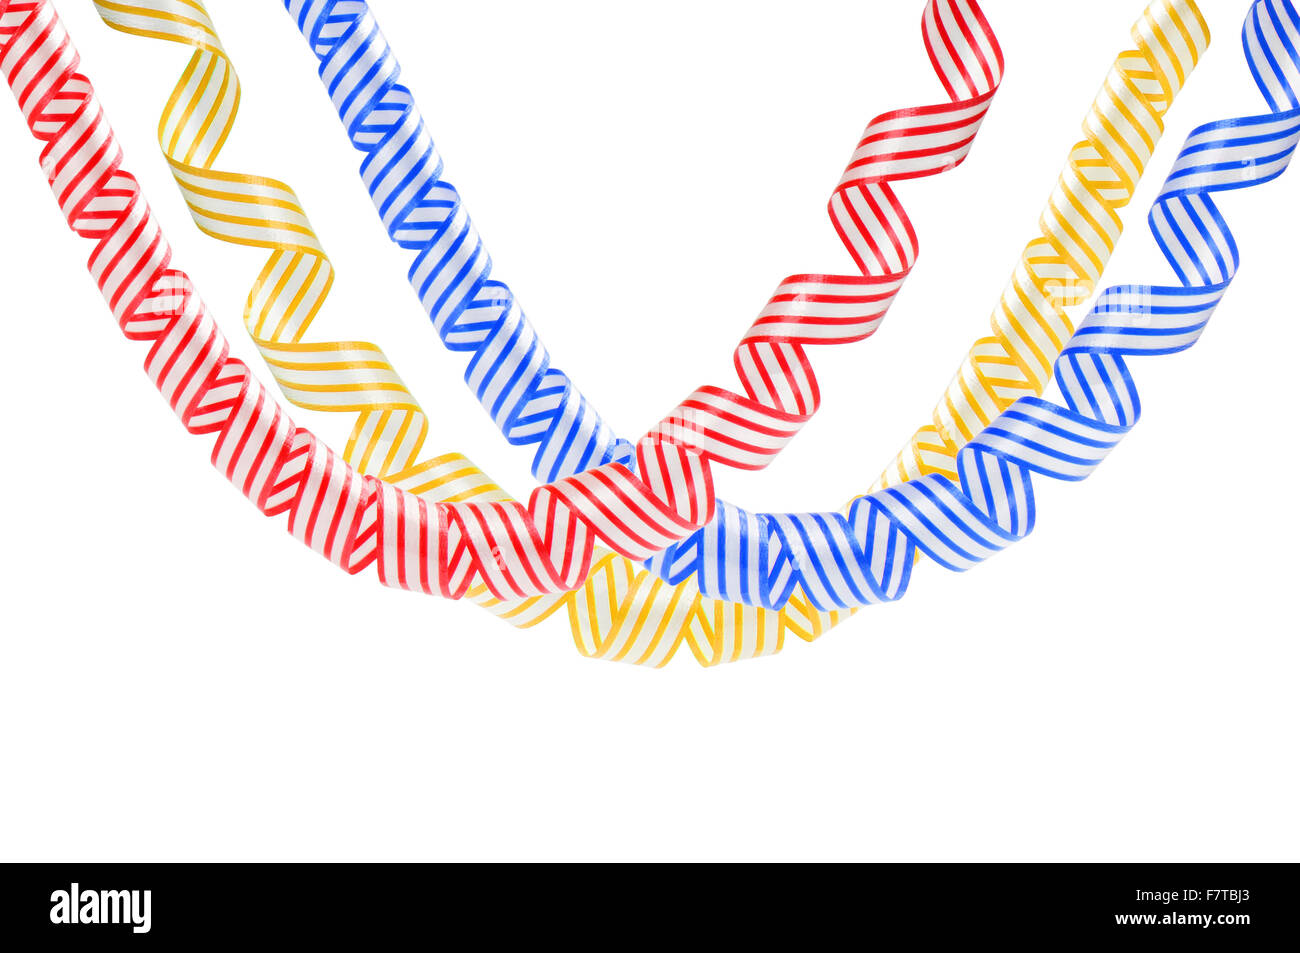 Yellow And Blue Streamers Isolated Stock Photo, Royalty-Free